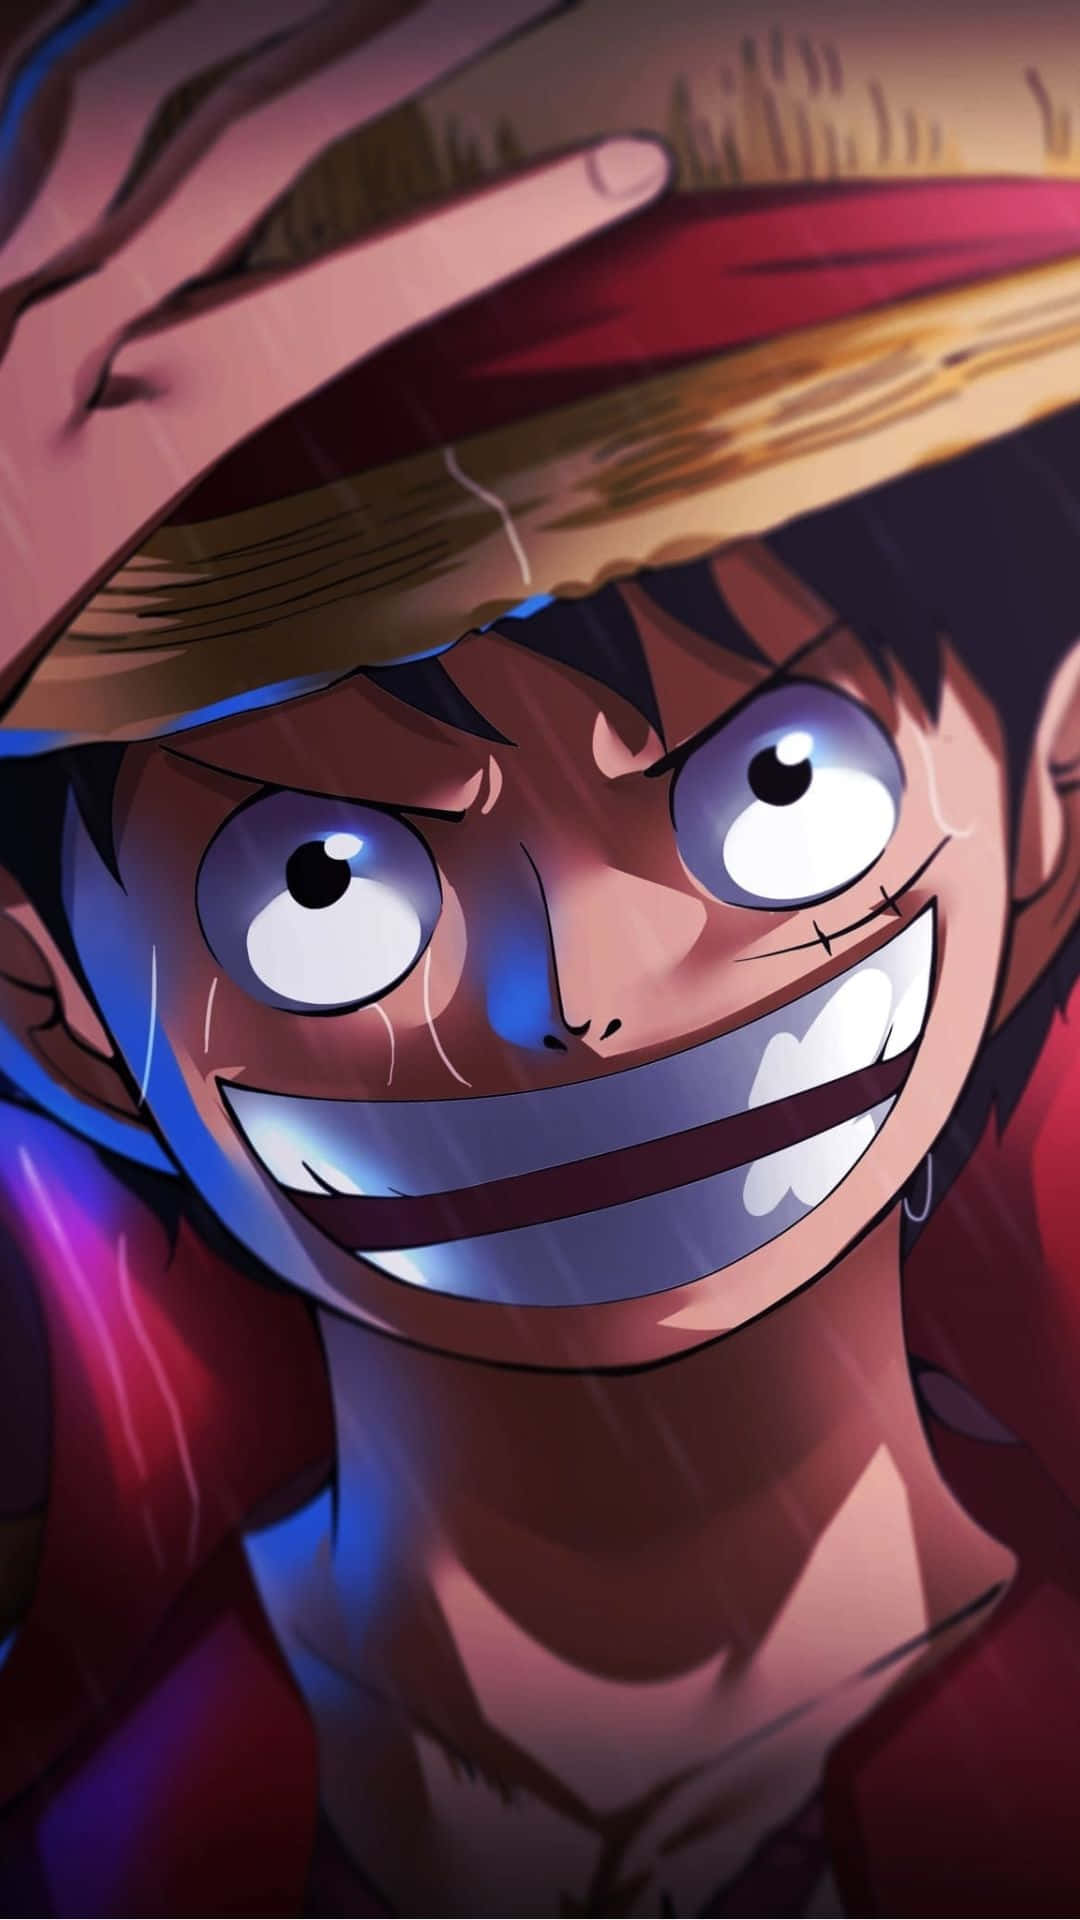 Luffy from One Piece on the cover of an iPhone Wallpaper